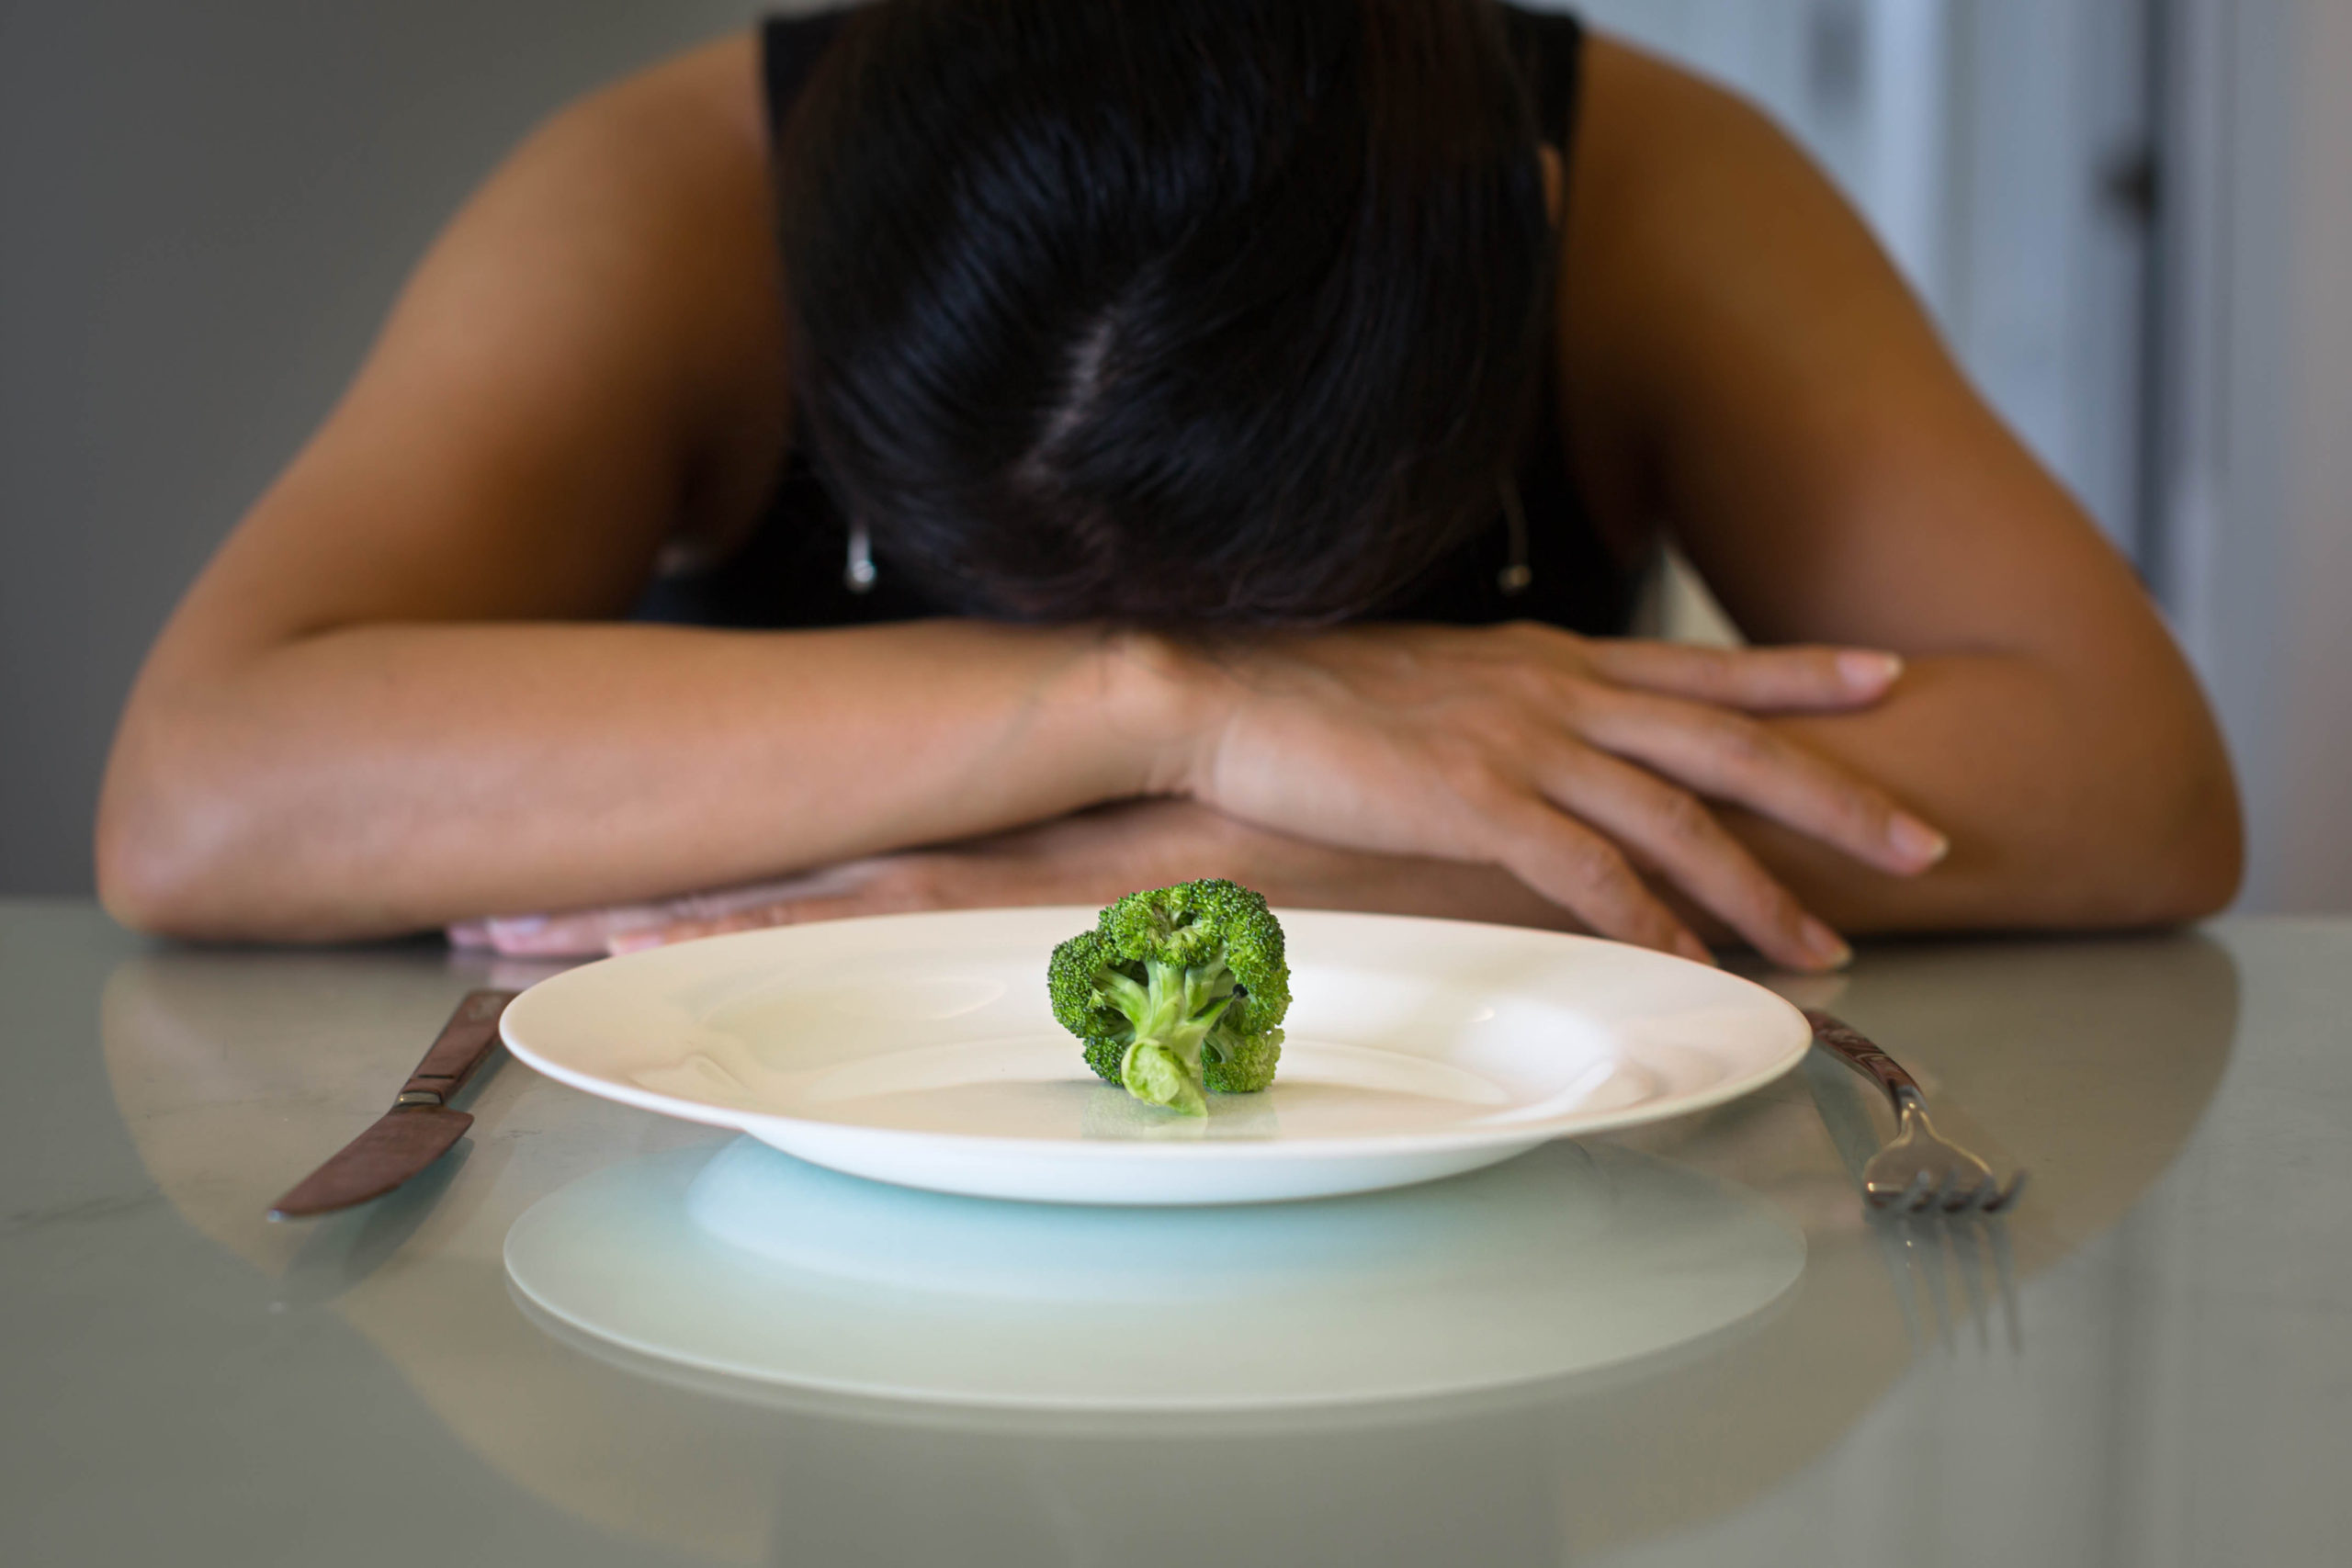 Woman tried of dieting in front of empty plat. You are more than your body image issues and disordered eating. Get support with anorexia nervosa treatment in Marietta, East Cobb, or via online therapy in Georgia. Our eating disorder therapist is here to support you!